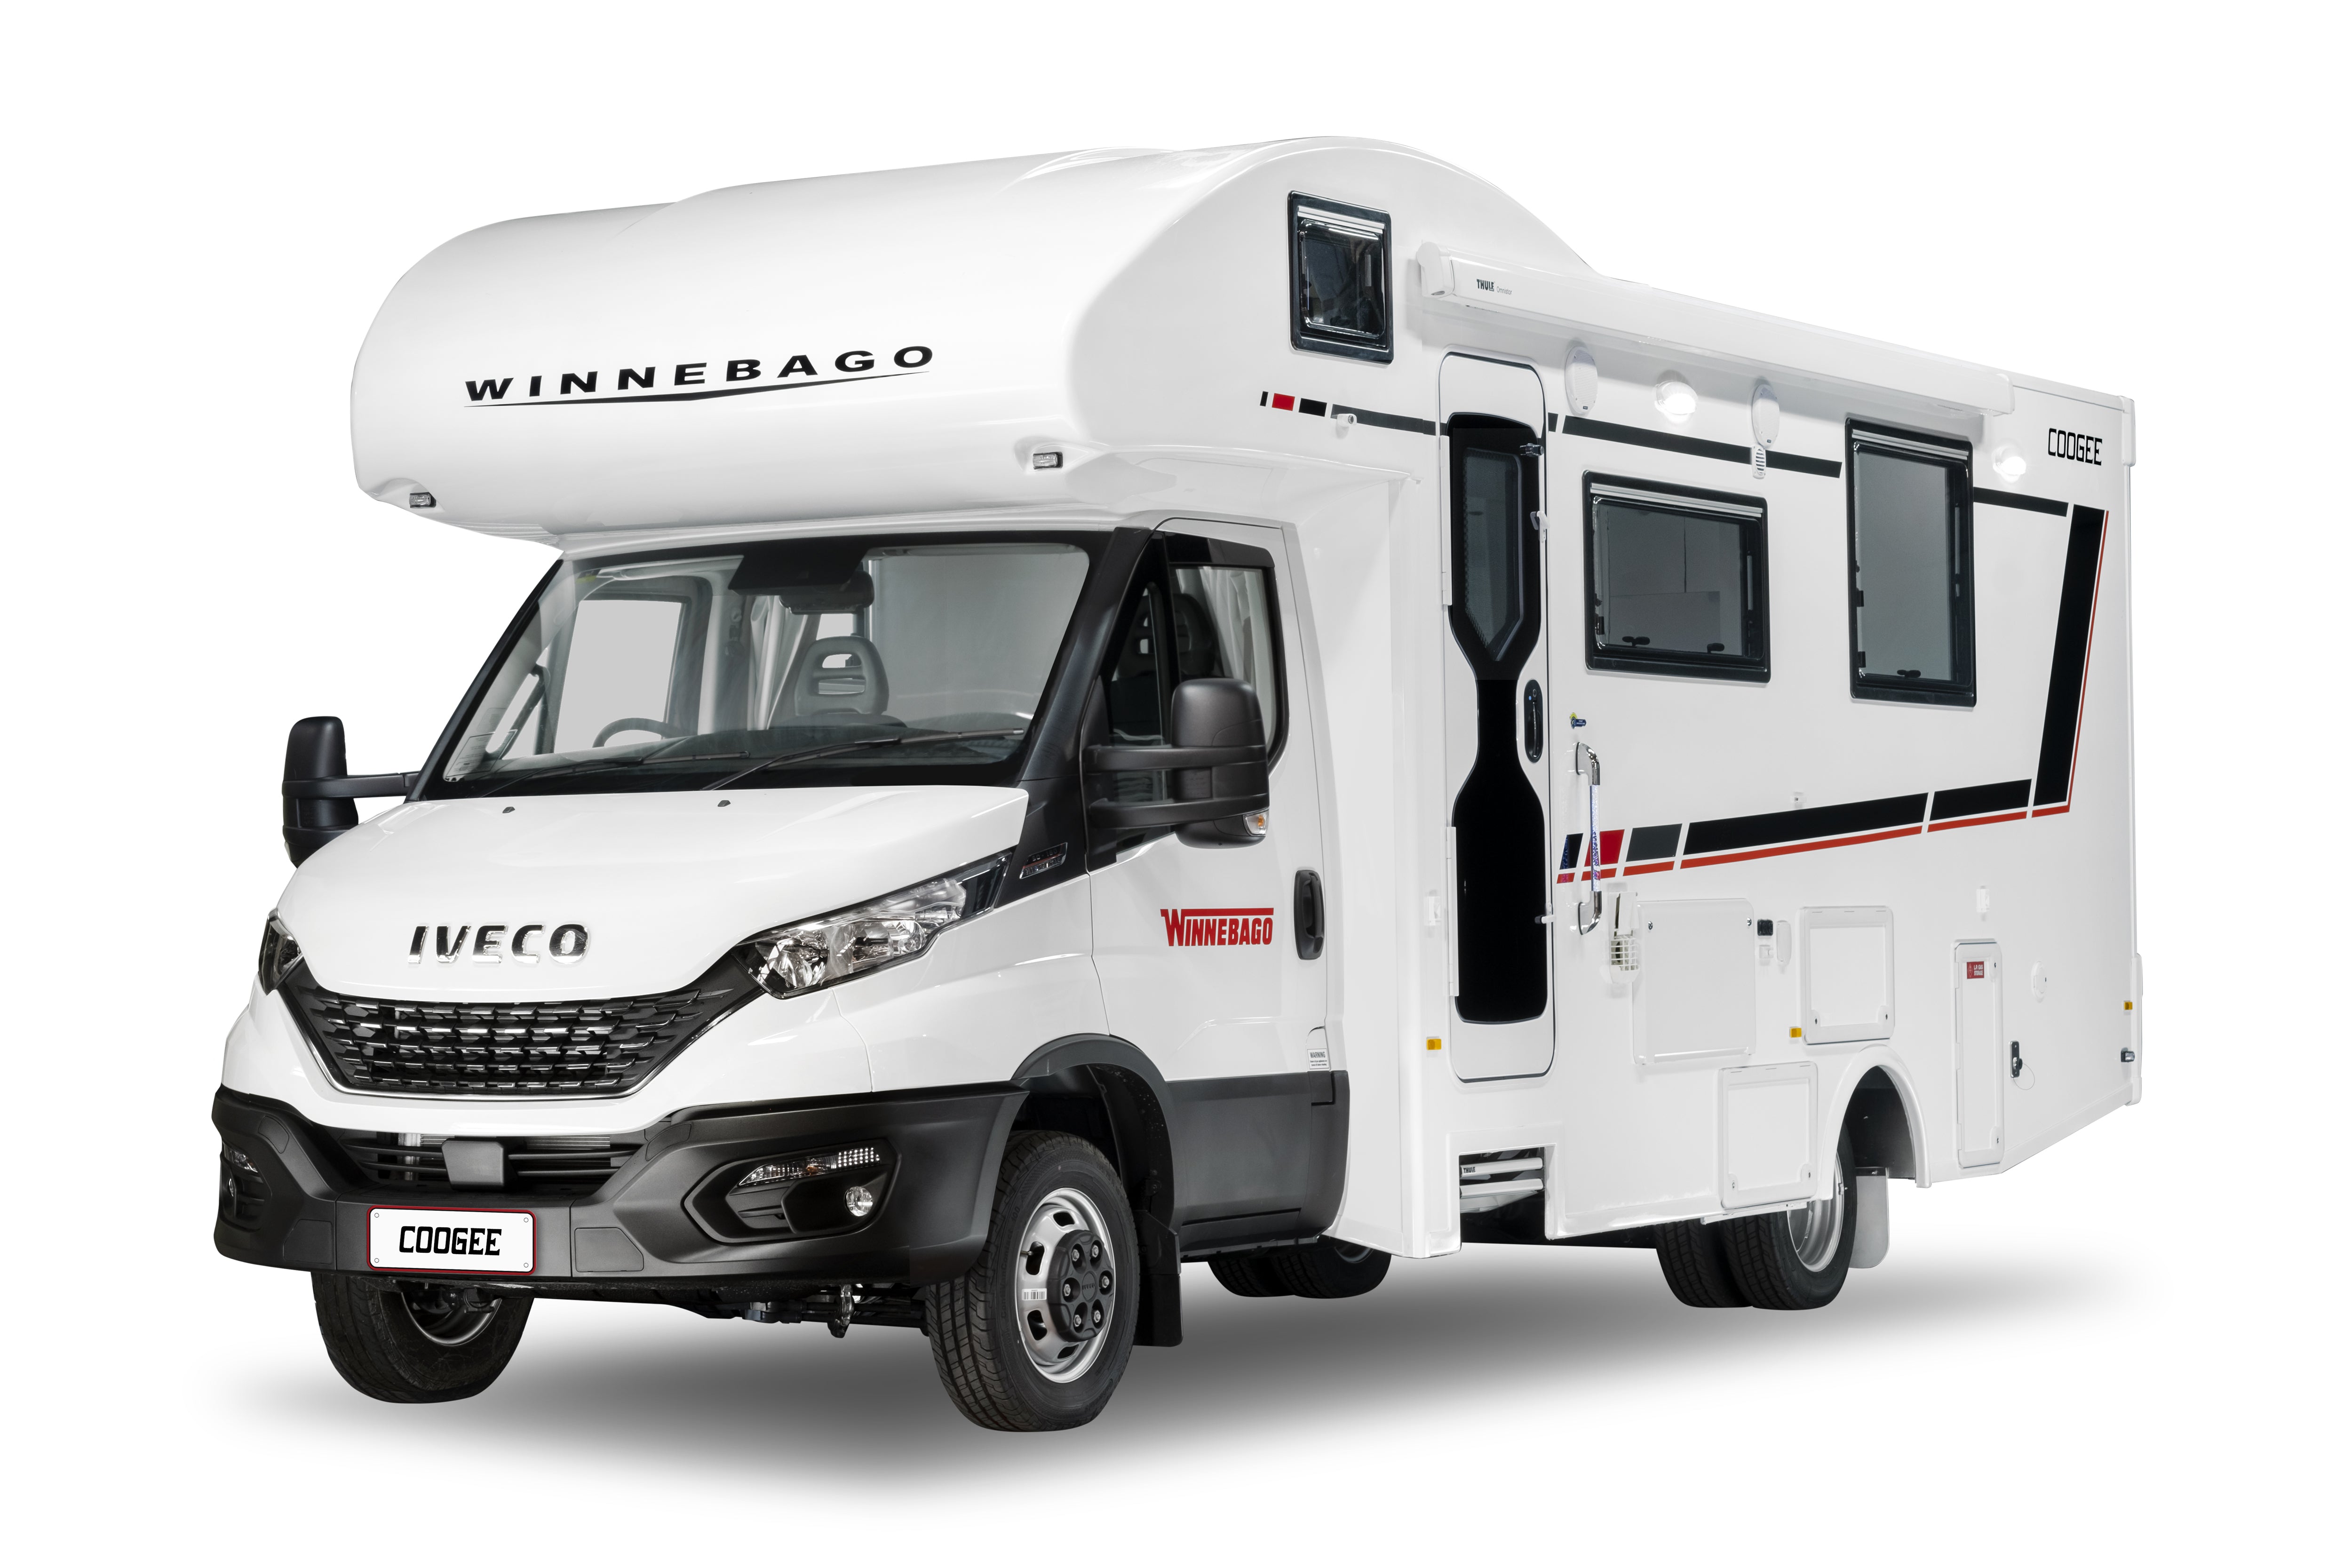 Building Trust and Excellence: The Winnebago Legacy and Caravans Away's Innovative Approach